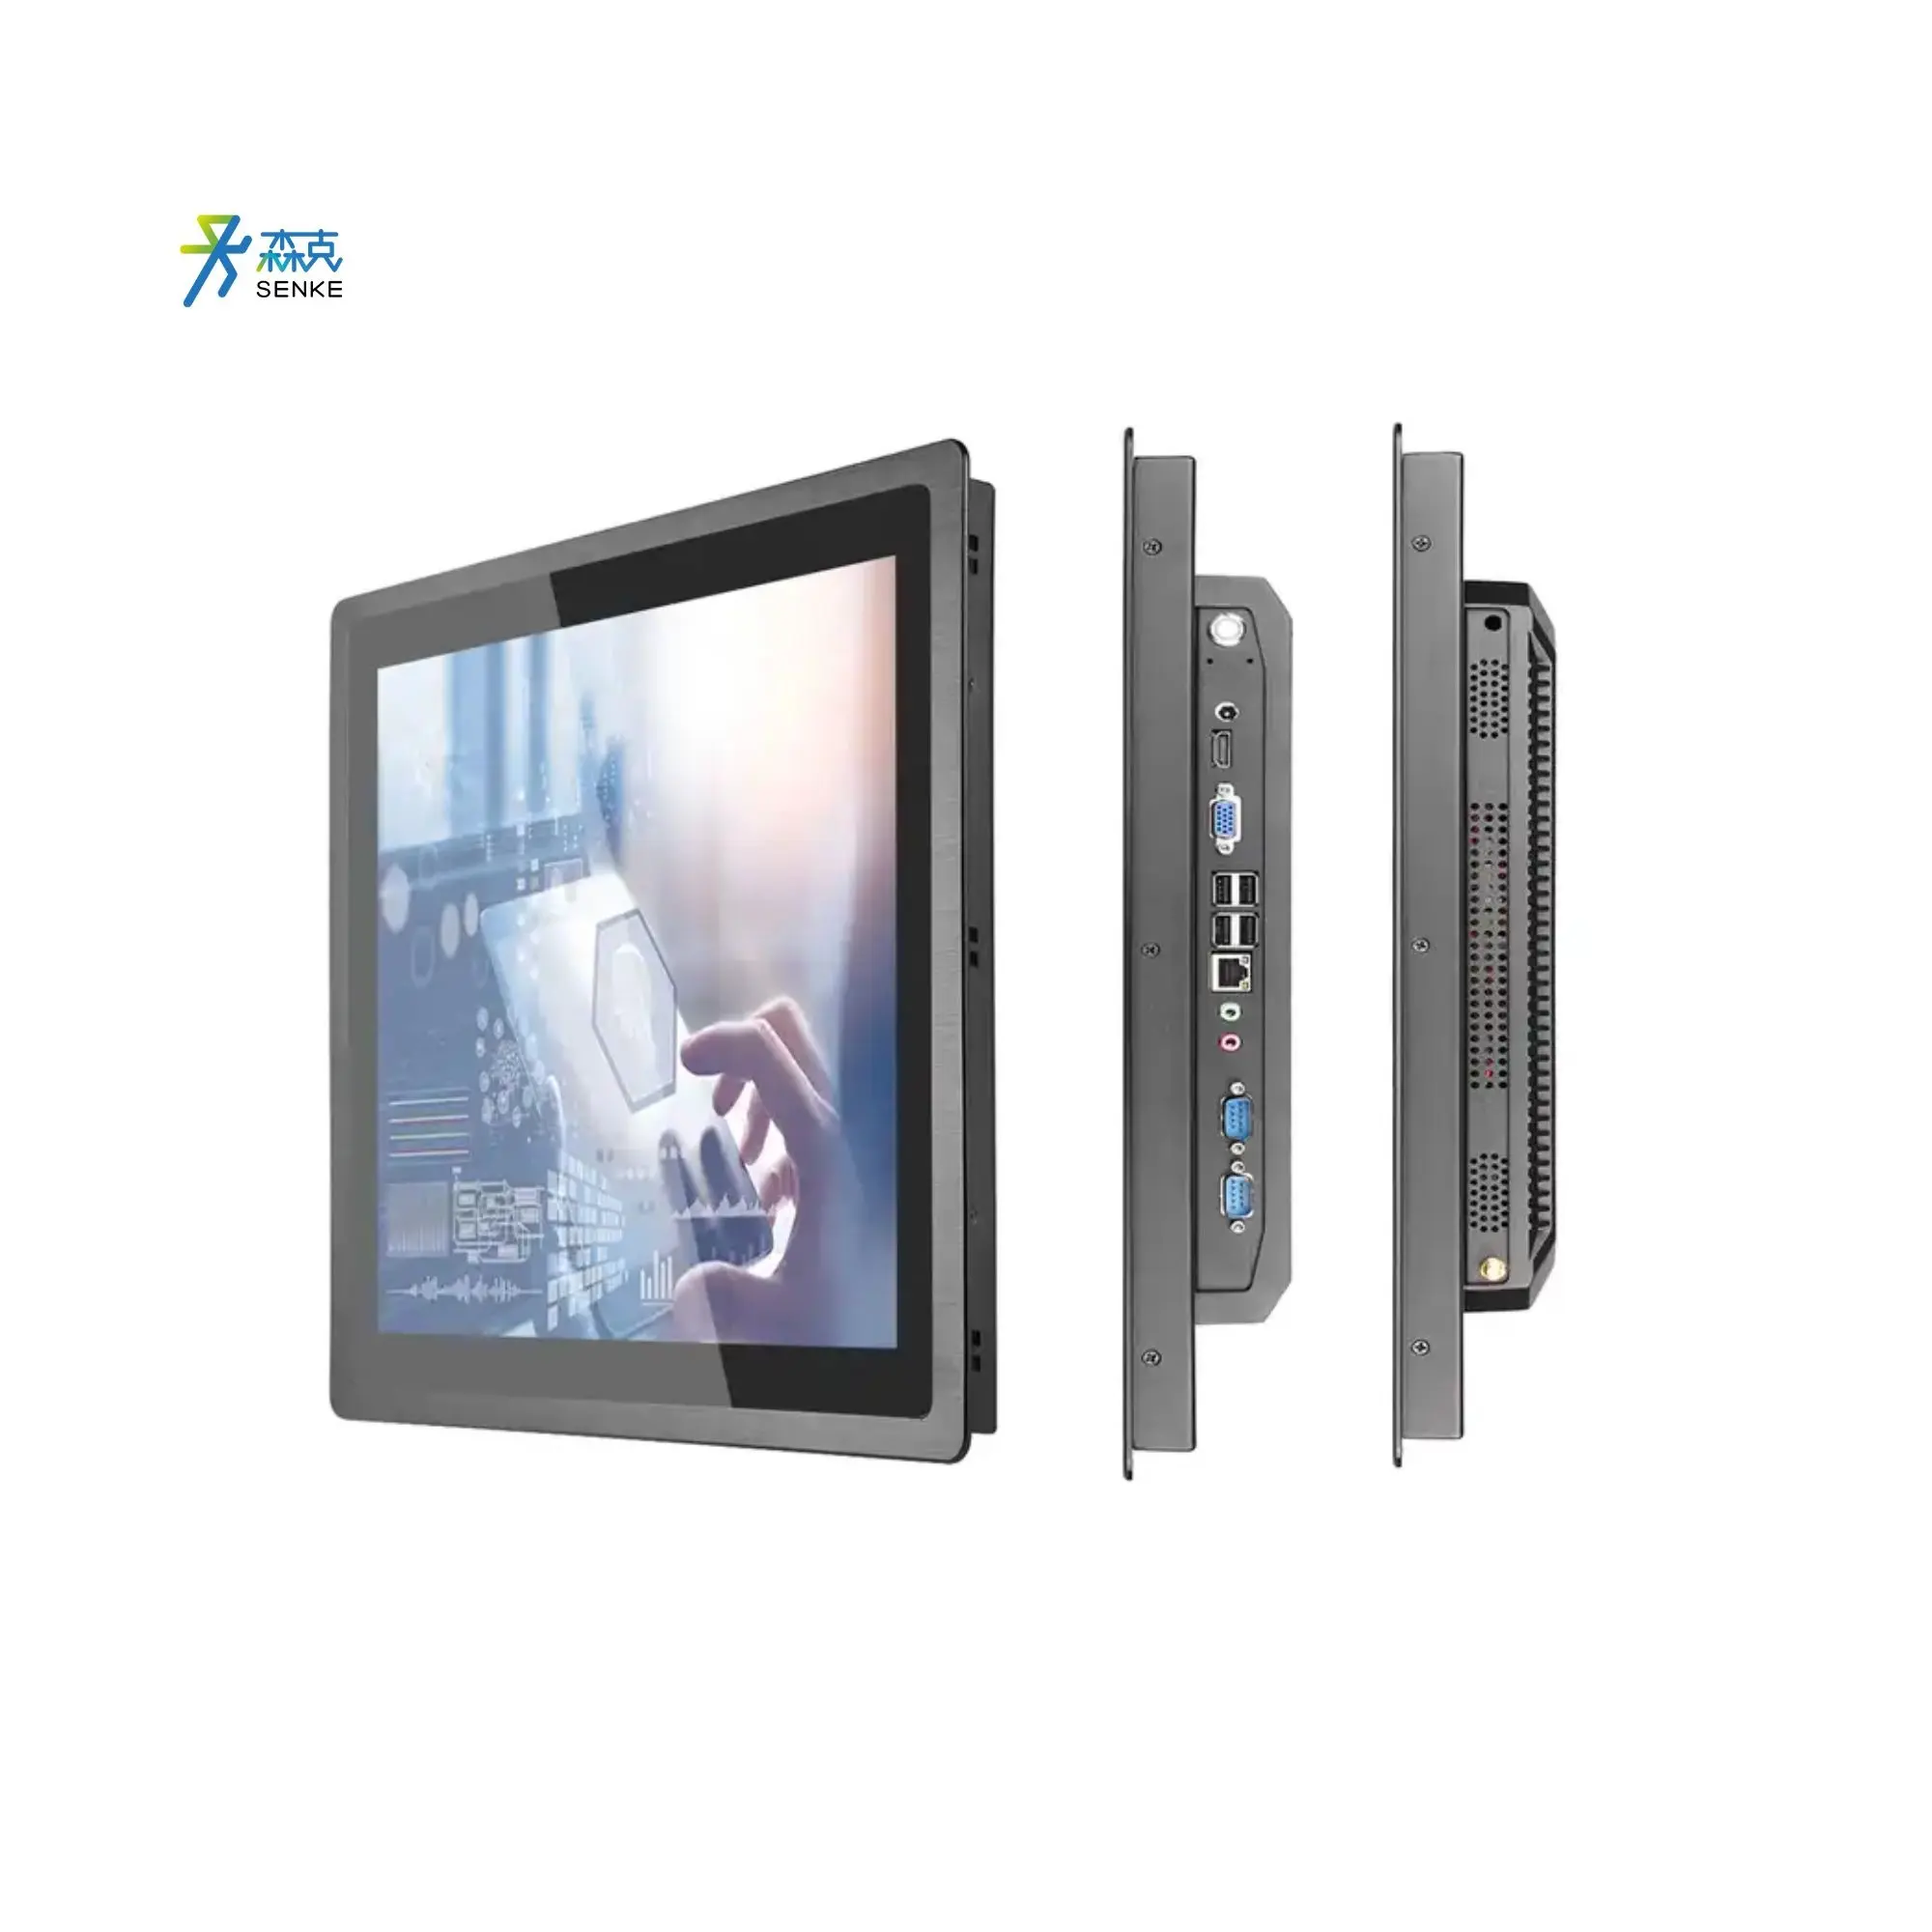 SENKE 13.3 15.6 Inch Industrial Touch Screen Android Touchscreen All In One Panel PC Tablet Computer